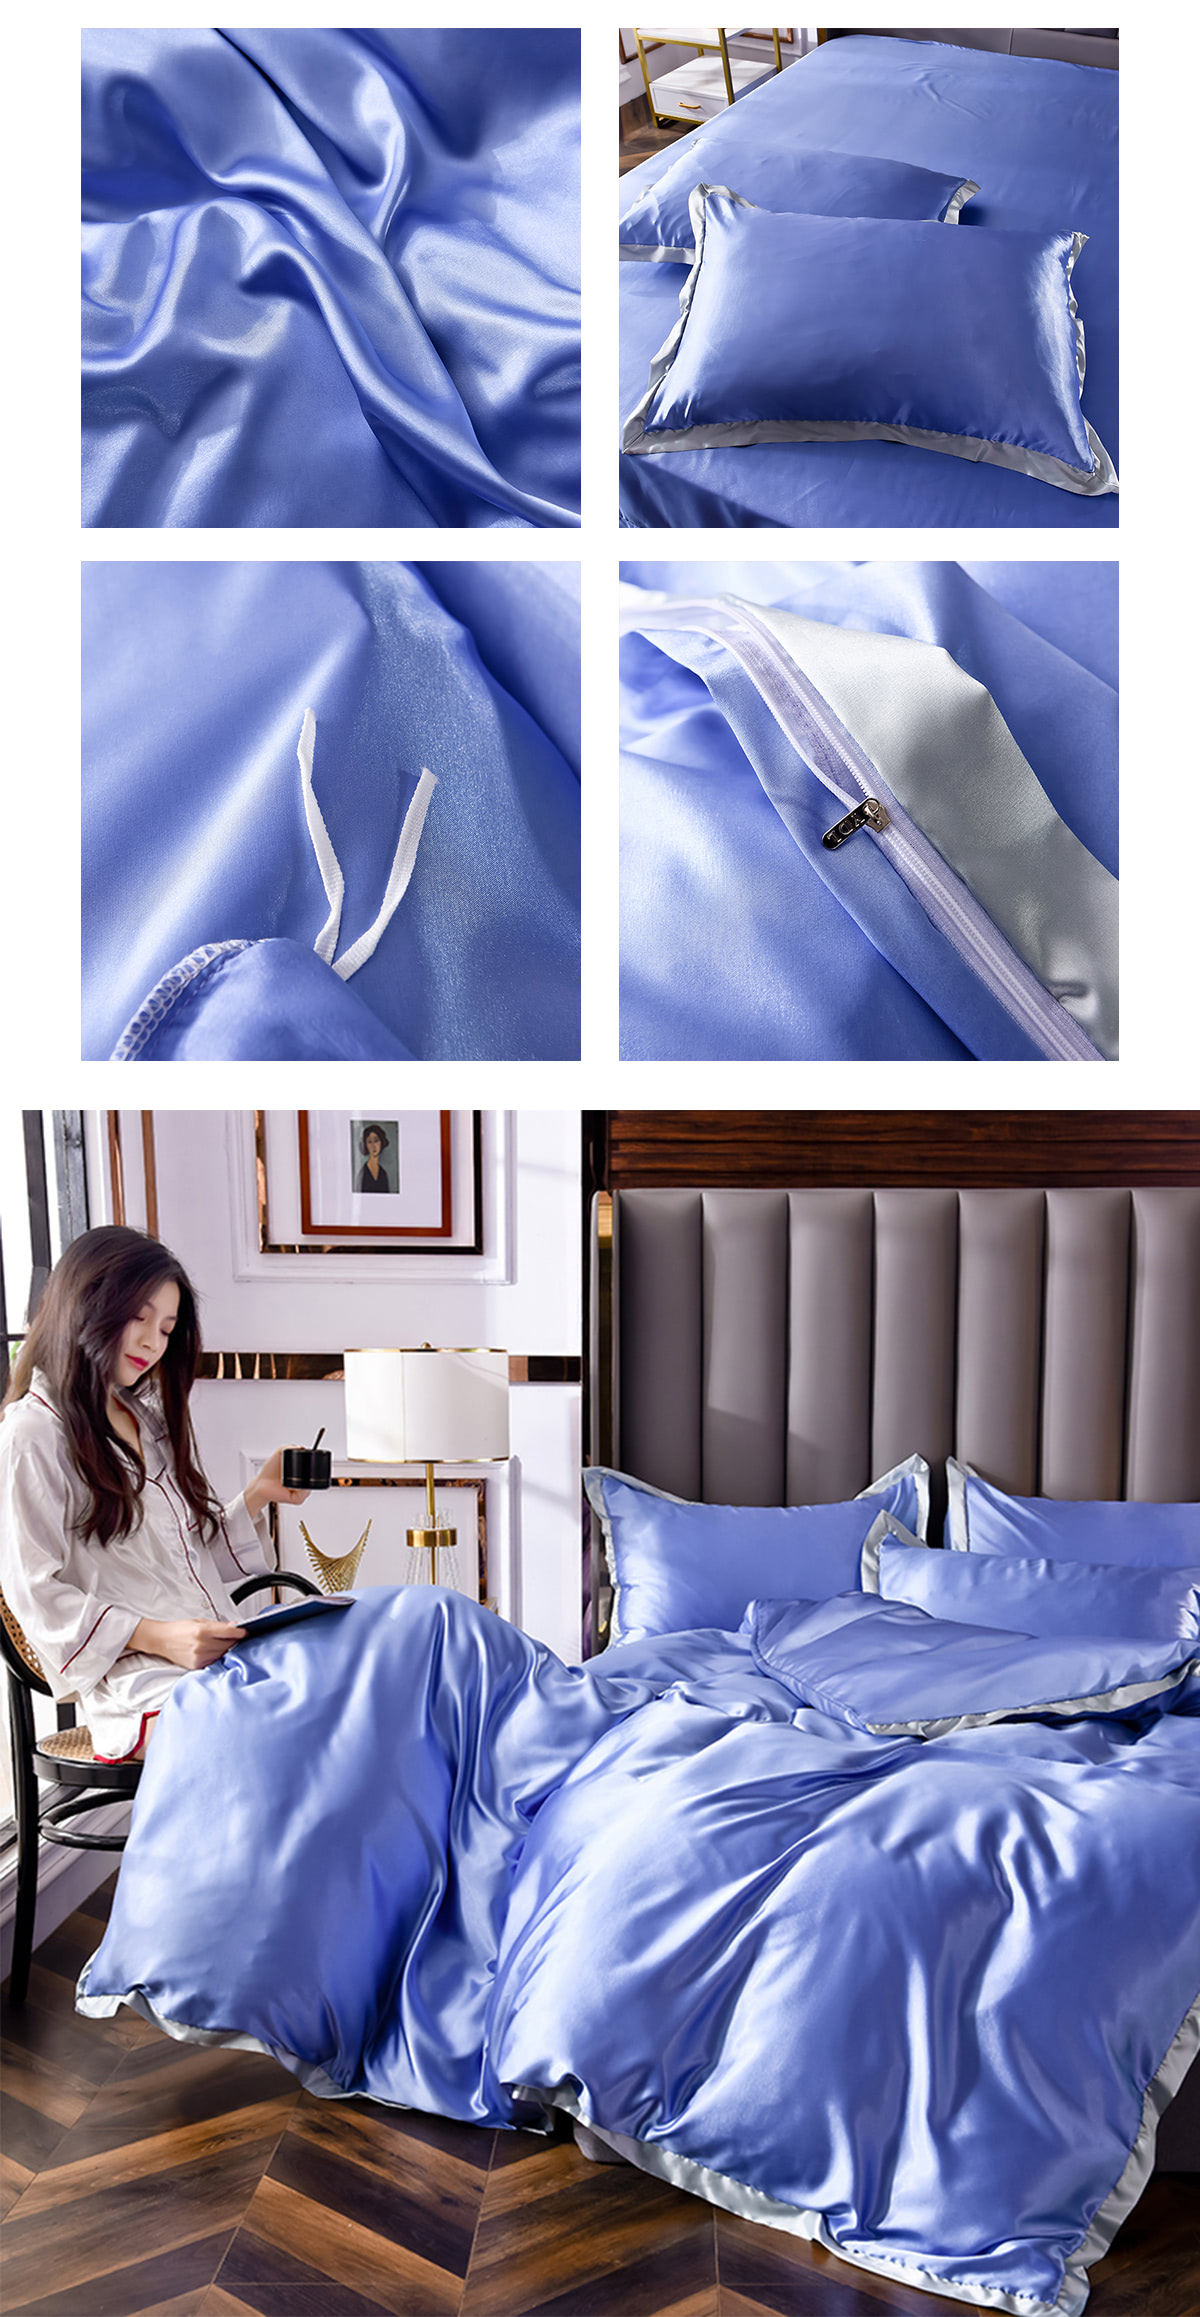 Fresh-and-Soft-Comfortable-Satin-Bed-Cover-Sheet-Set19.jpg